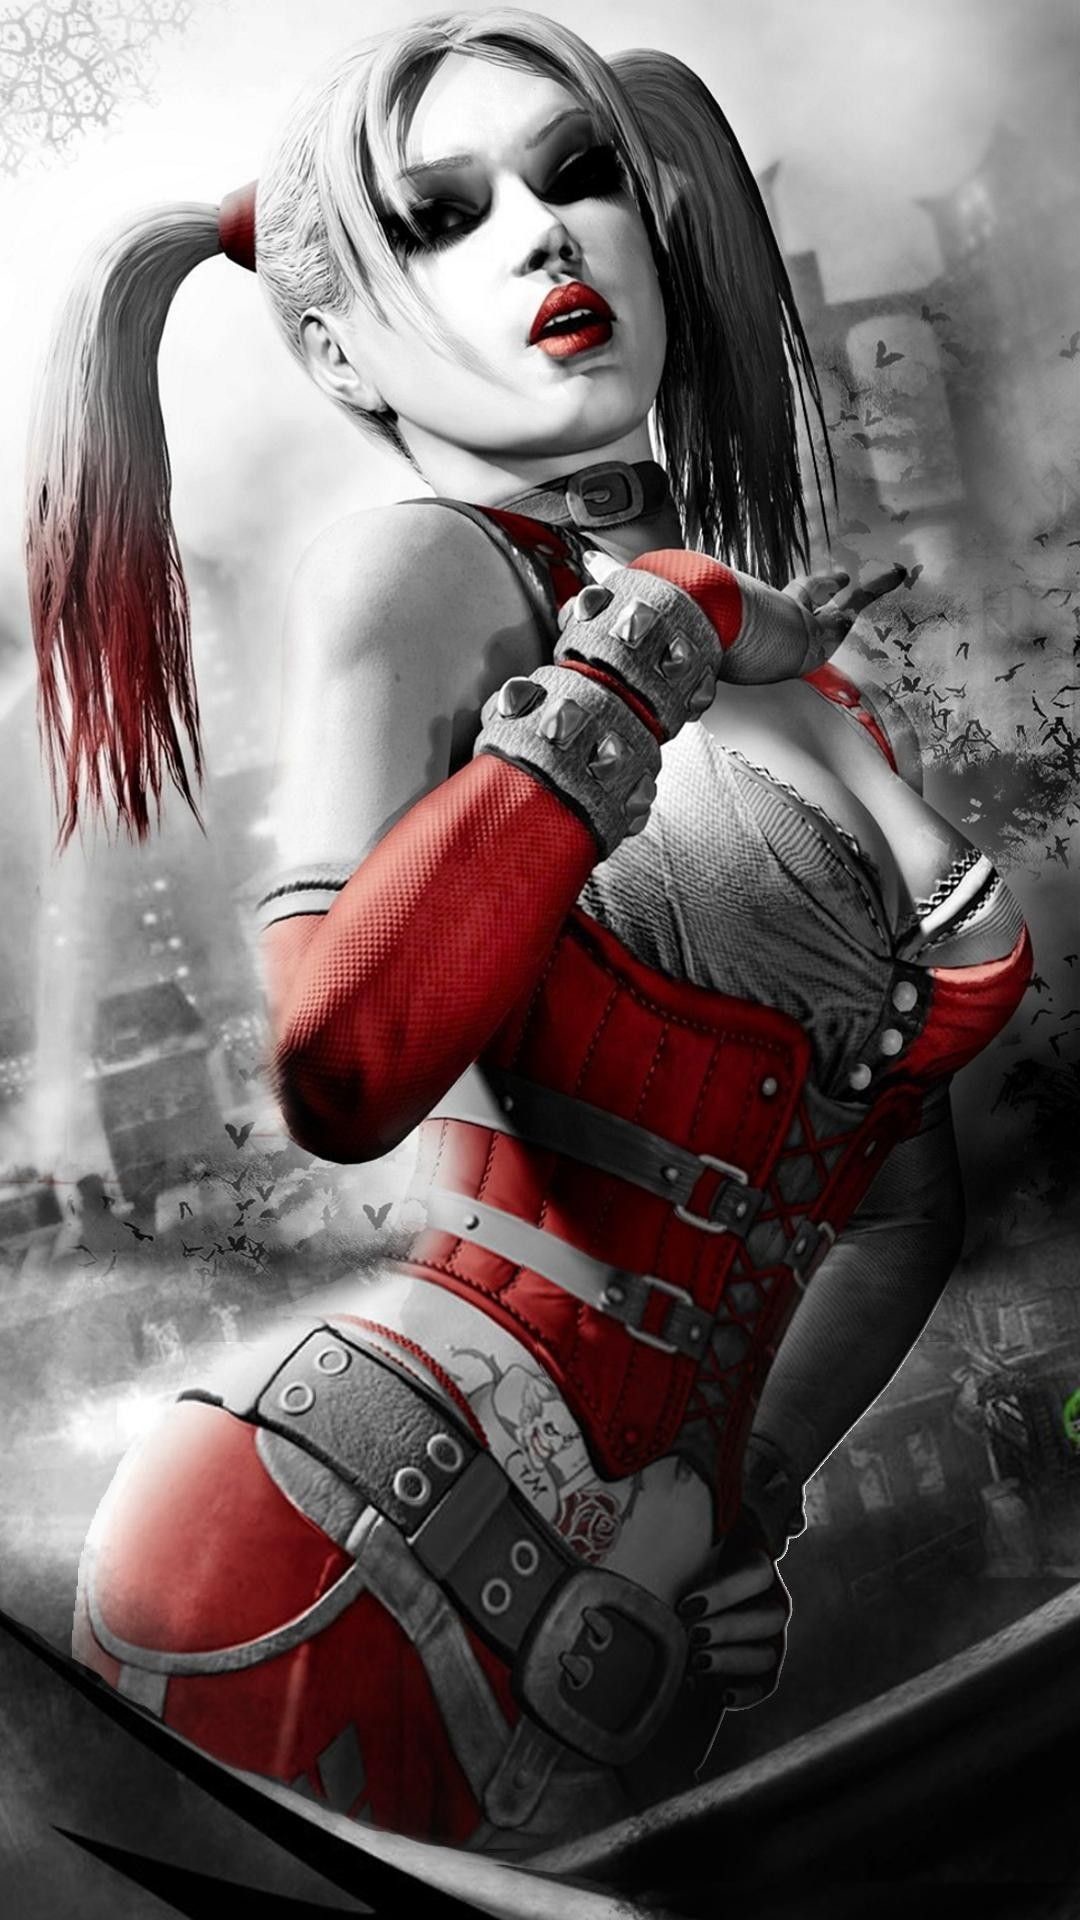 1080x1920 Harley Quinn Wallpaper For Android - Best Android Wallpapers